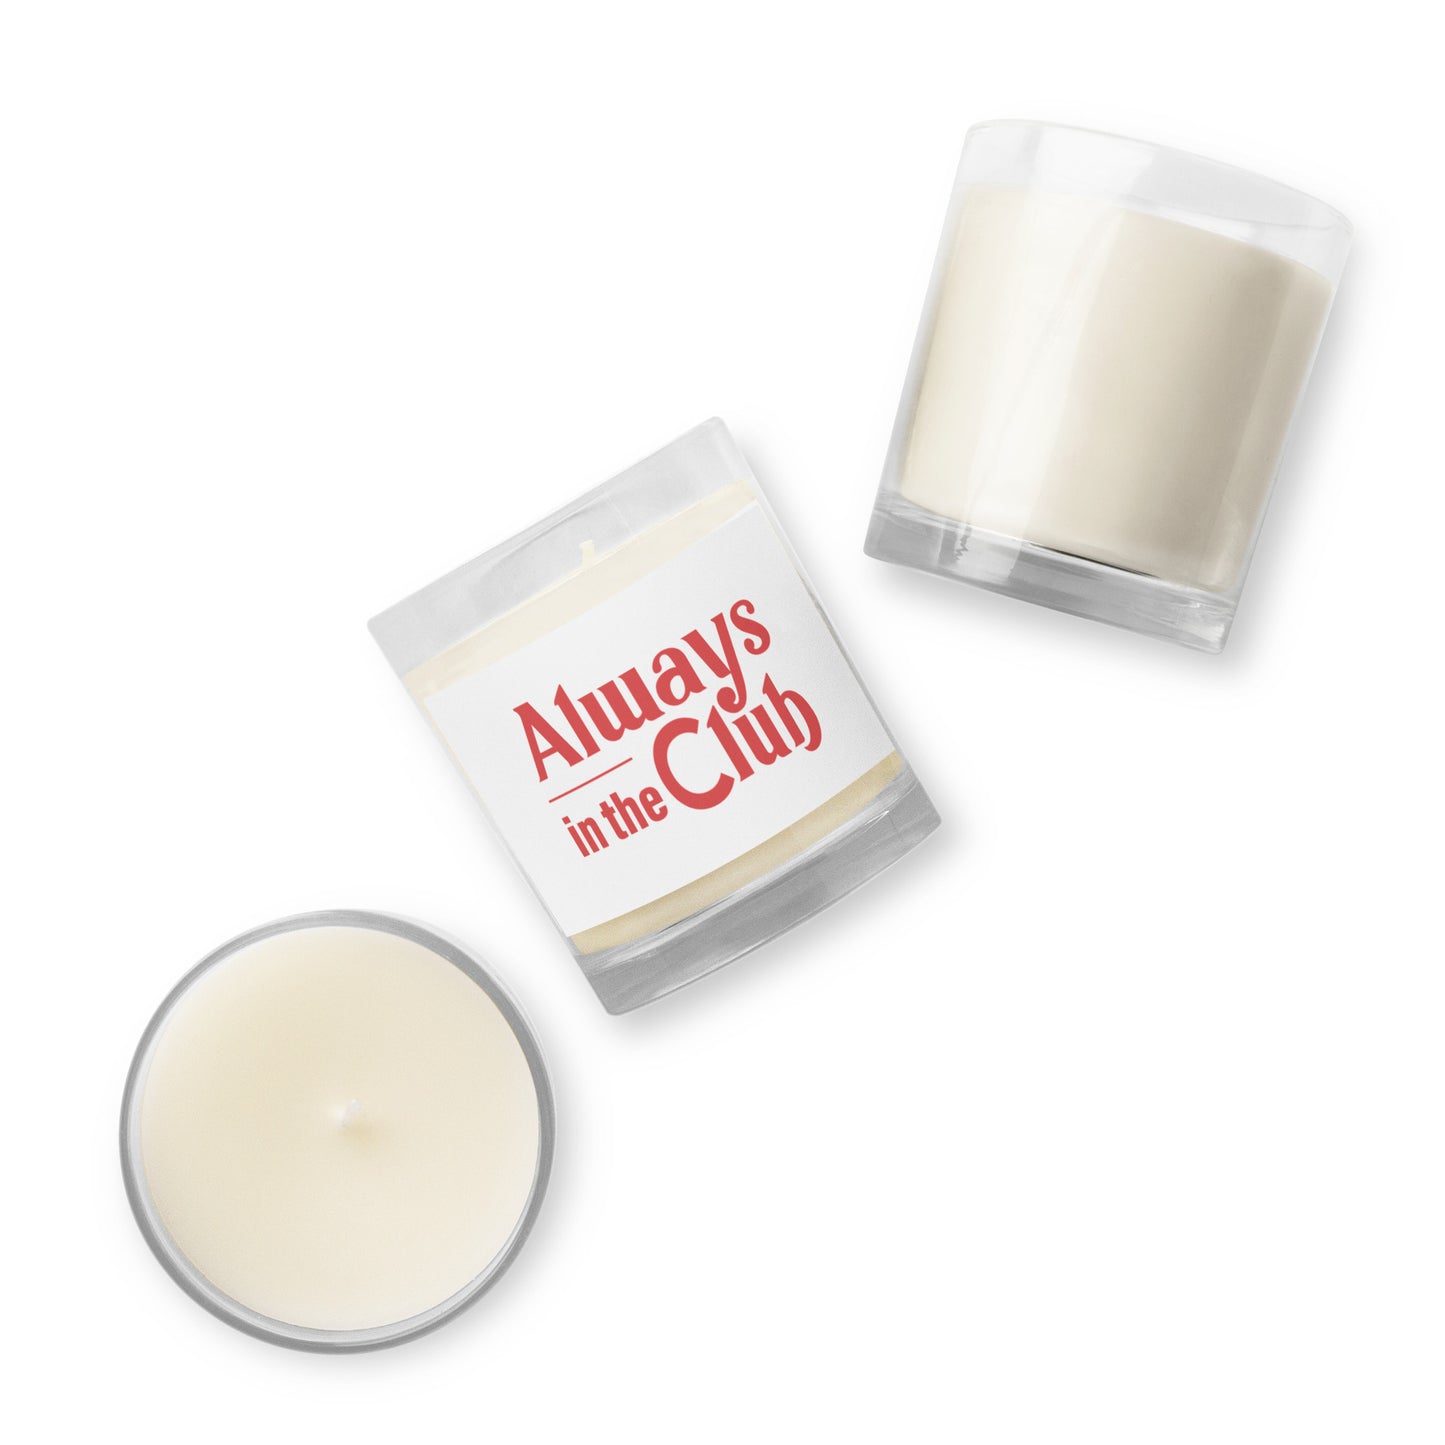 Always In The Club Glass Jar Soy Wax Candle